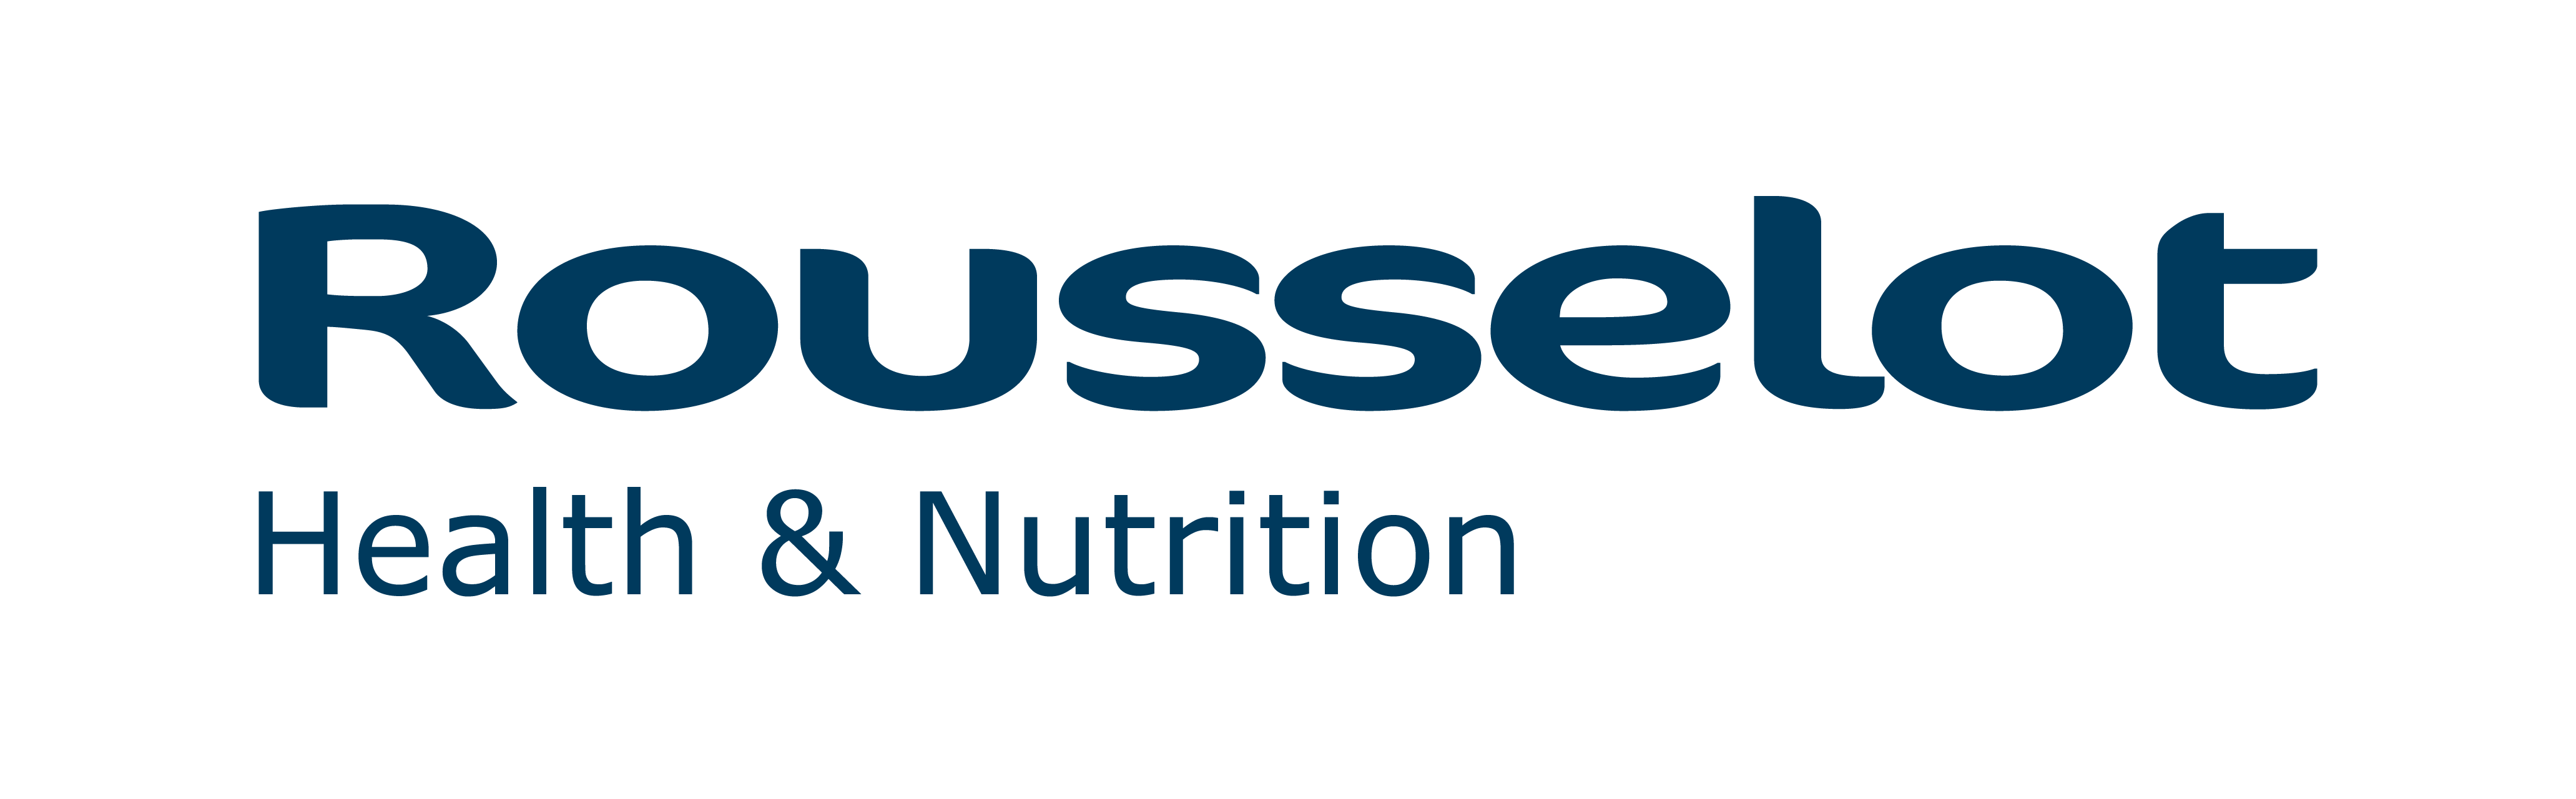 Logo_Rousselot_Health_And_Nutrition_Tagline-1_RGB.png